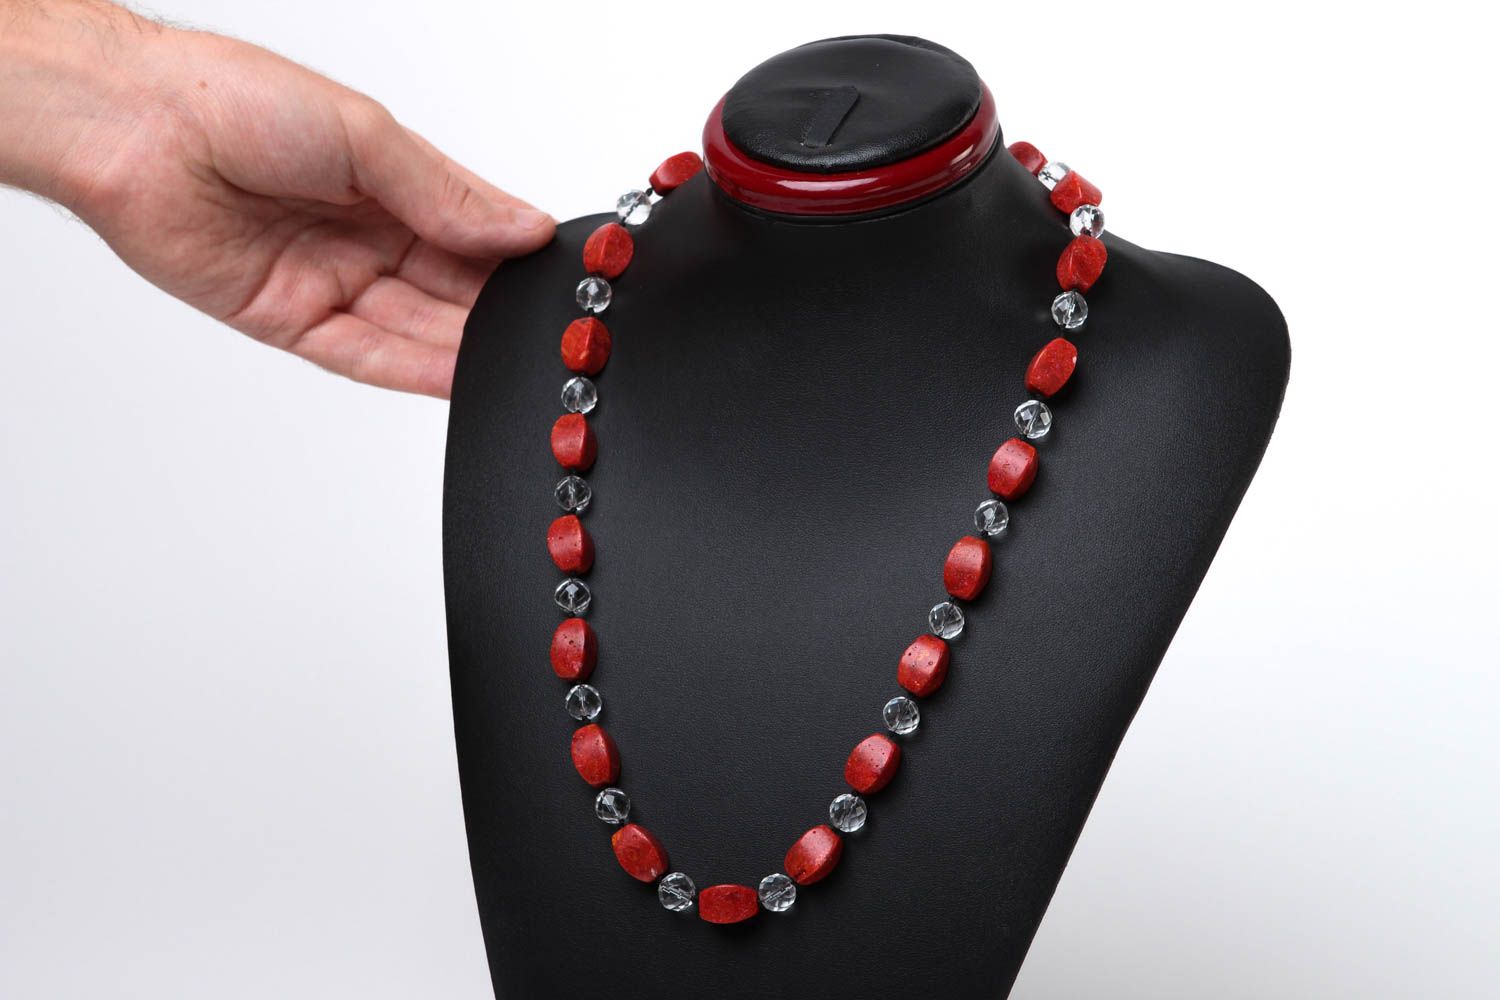 Handmade jewelry bead necklace gemstone accessories gift ideas for women photo 5